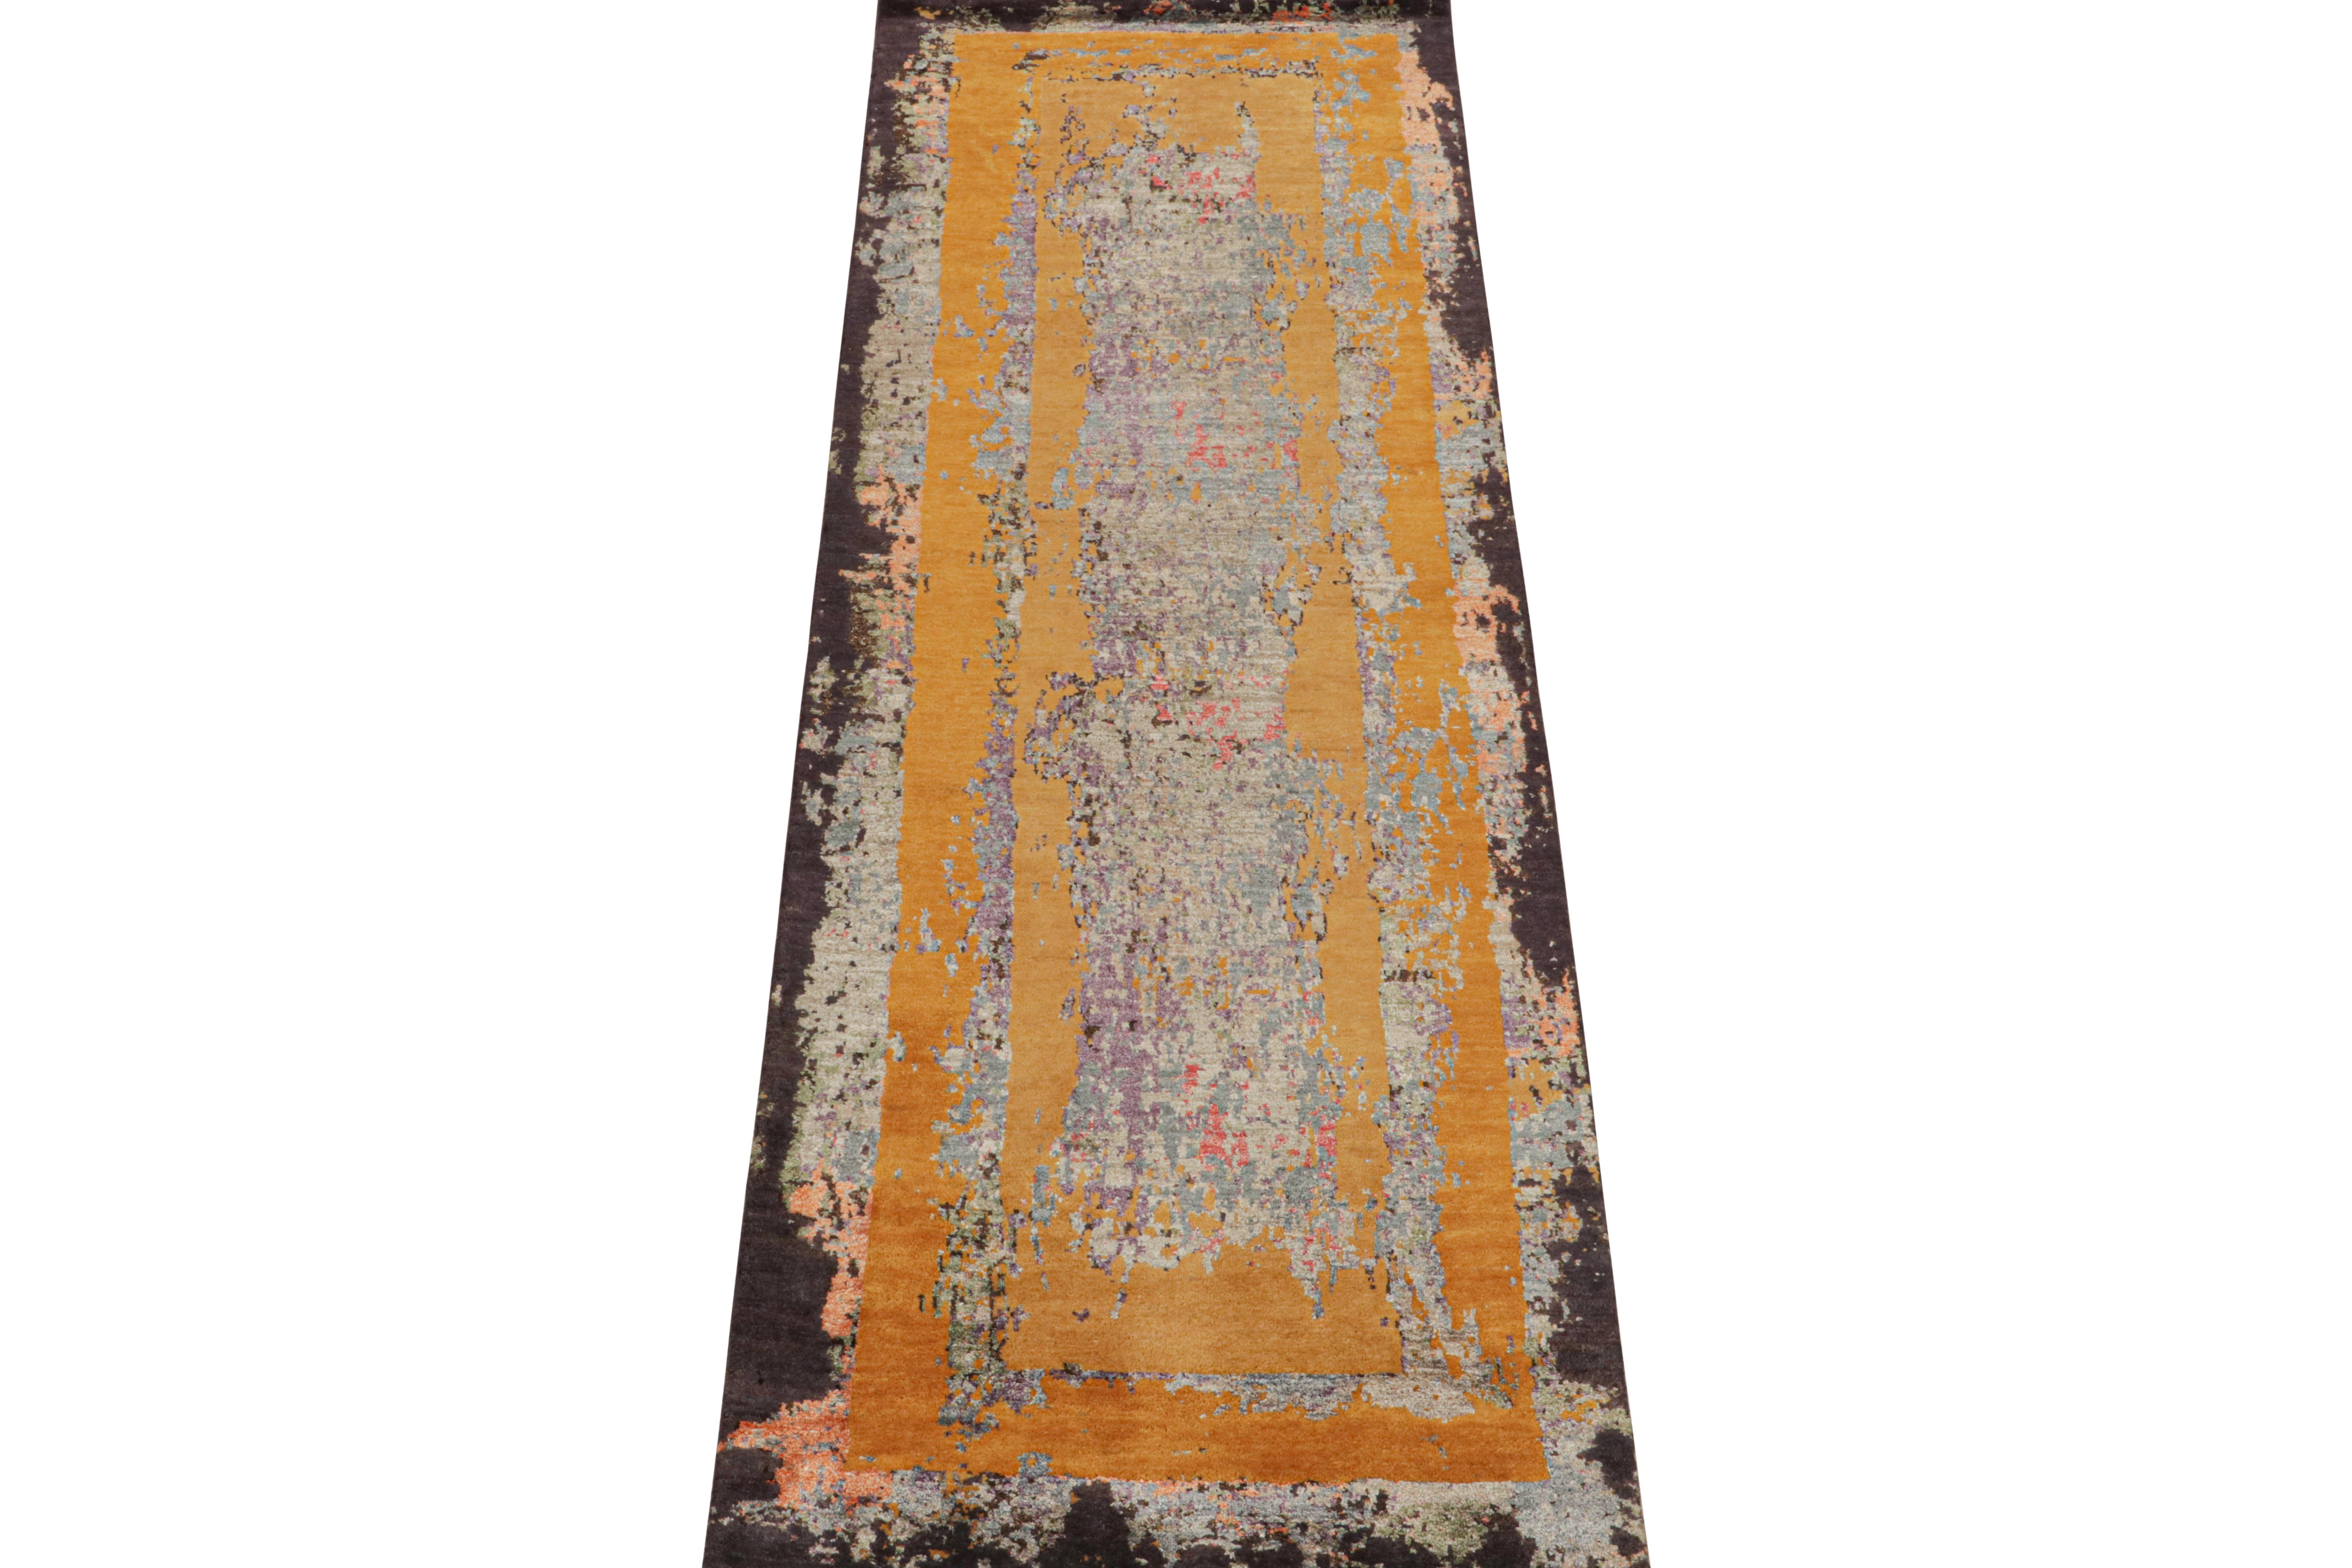 This 3x9 abstract runner is a new addition to Rug & Kilim’s Modern rug collection. Hand-knotted in wool, cotton and silk, its design plays with abstract sensibilities in a bold modern fashion.

Further on the Design:

This is a masterpiece from a